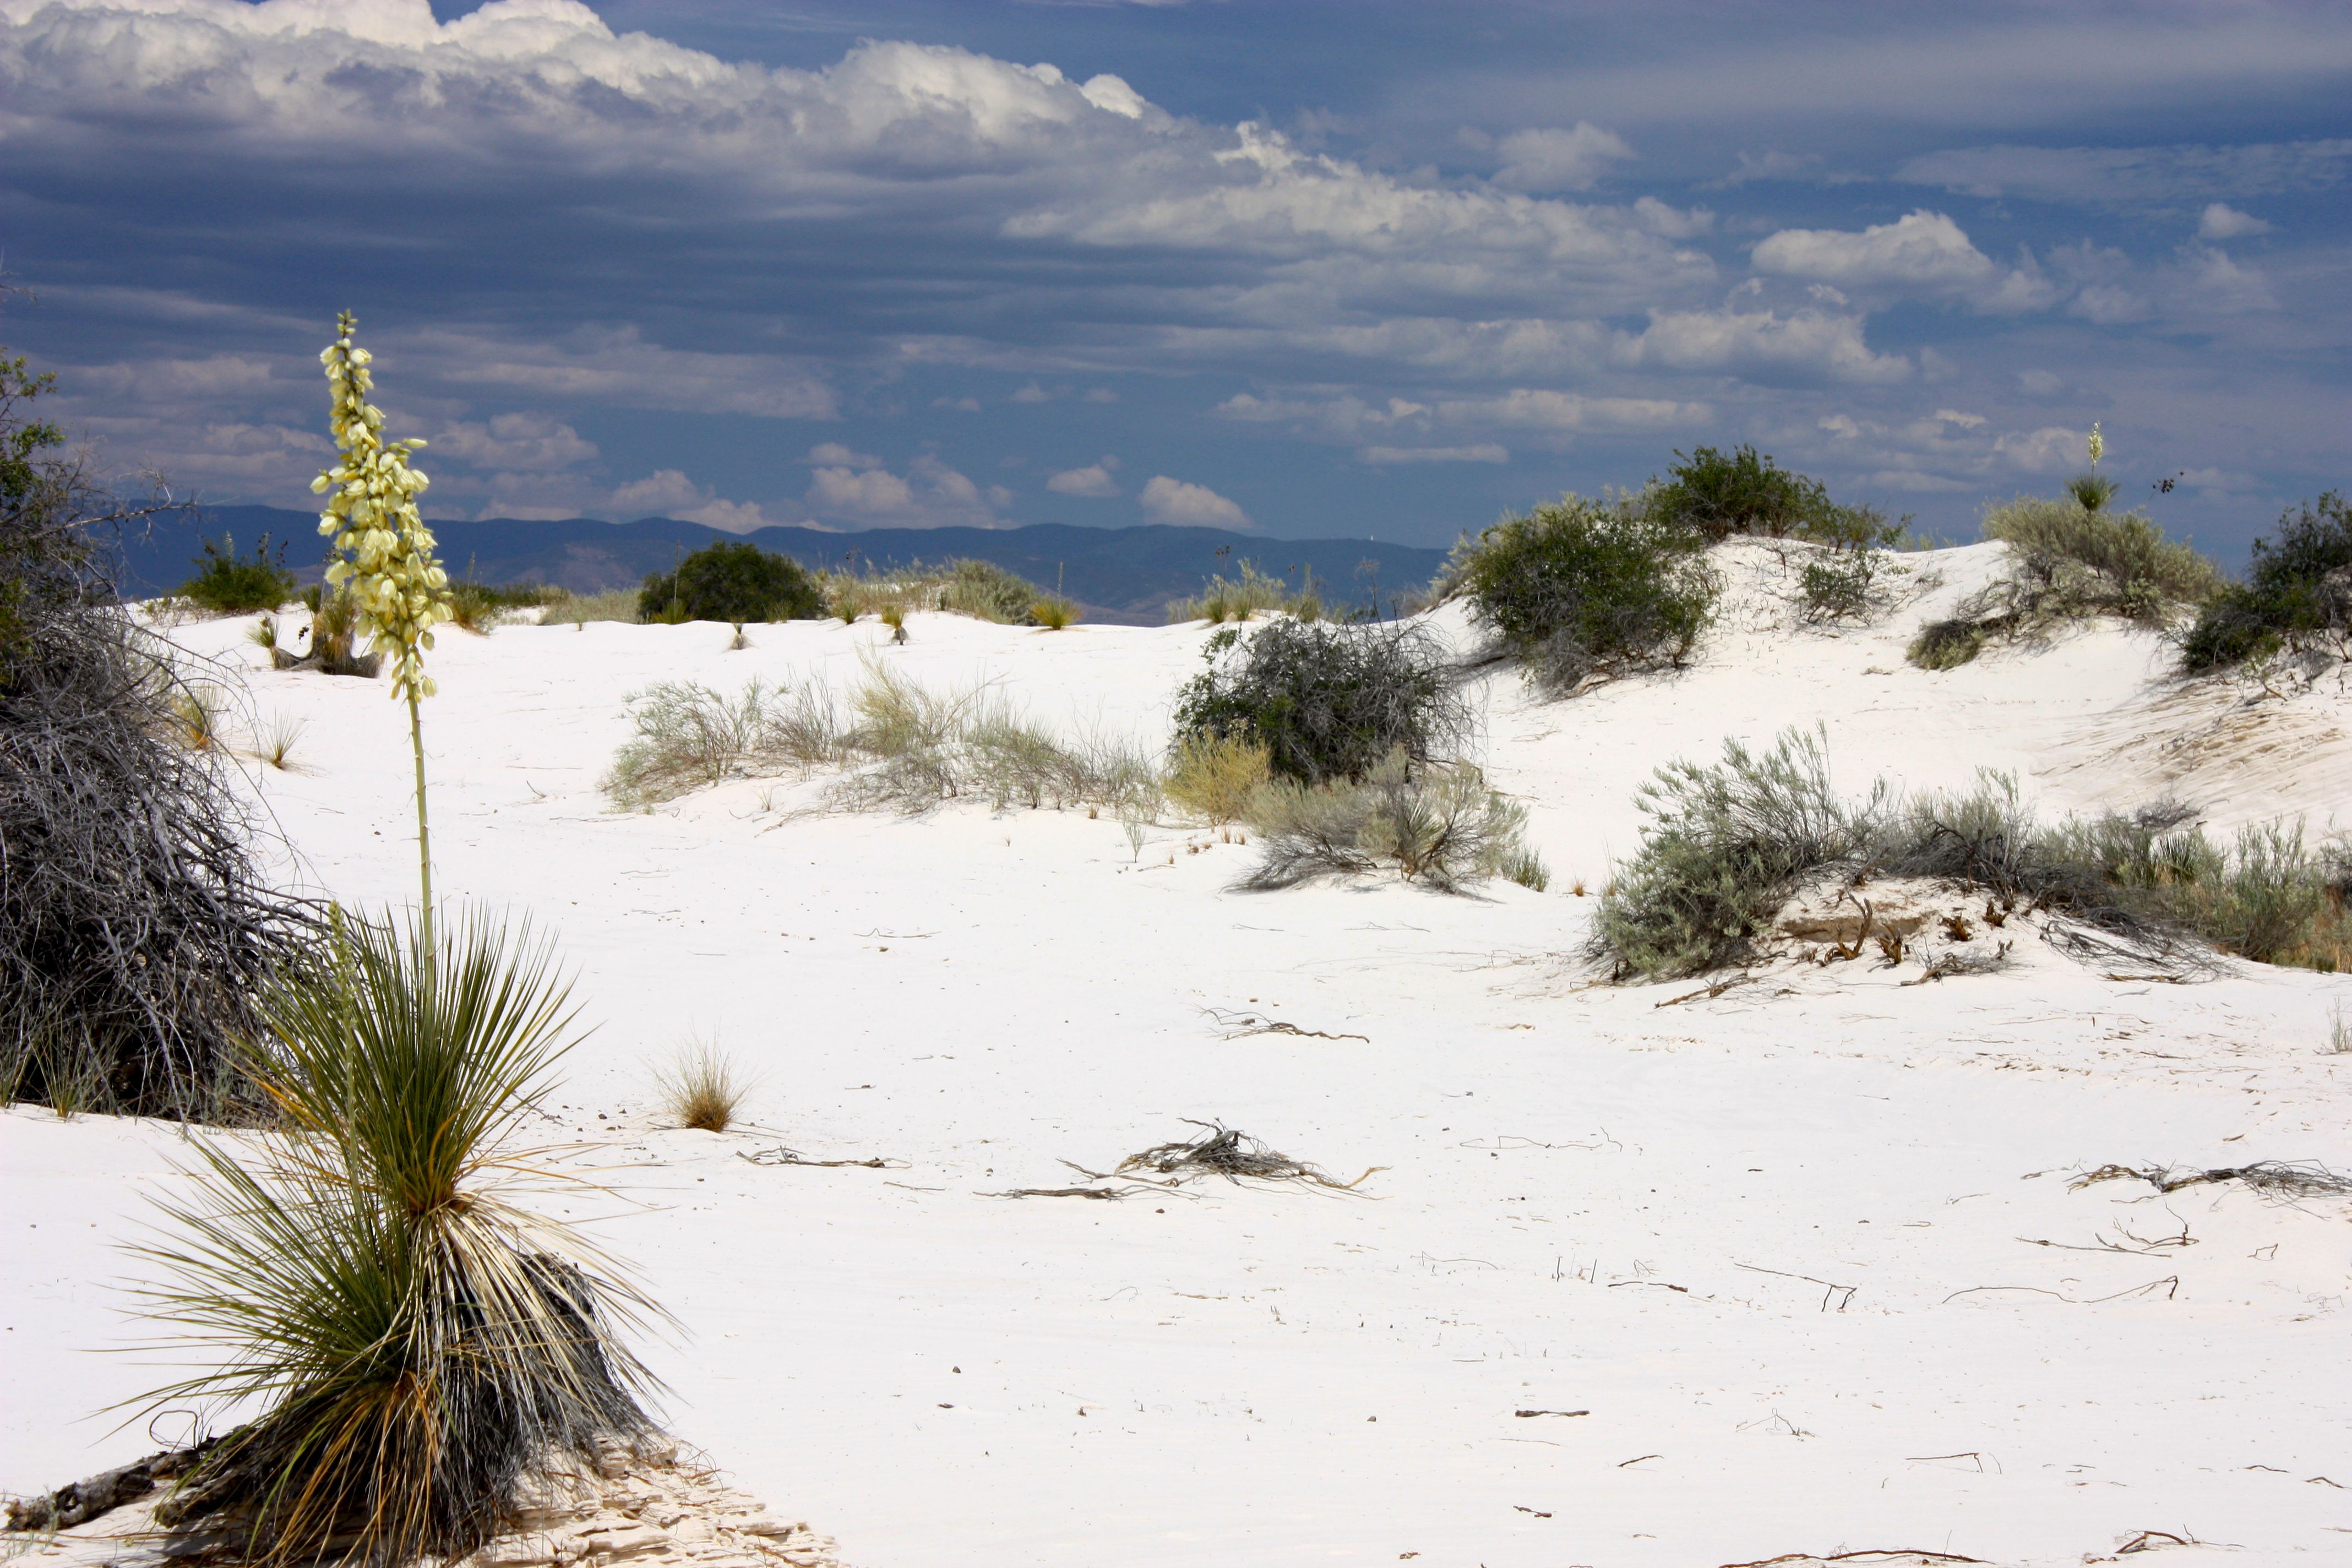 Yucca Plant at White Sands National Monument